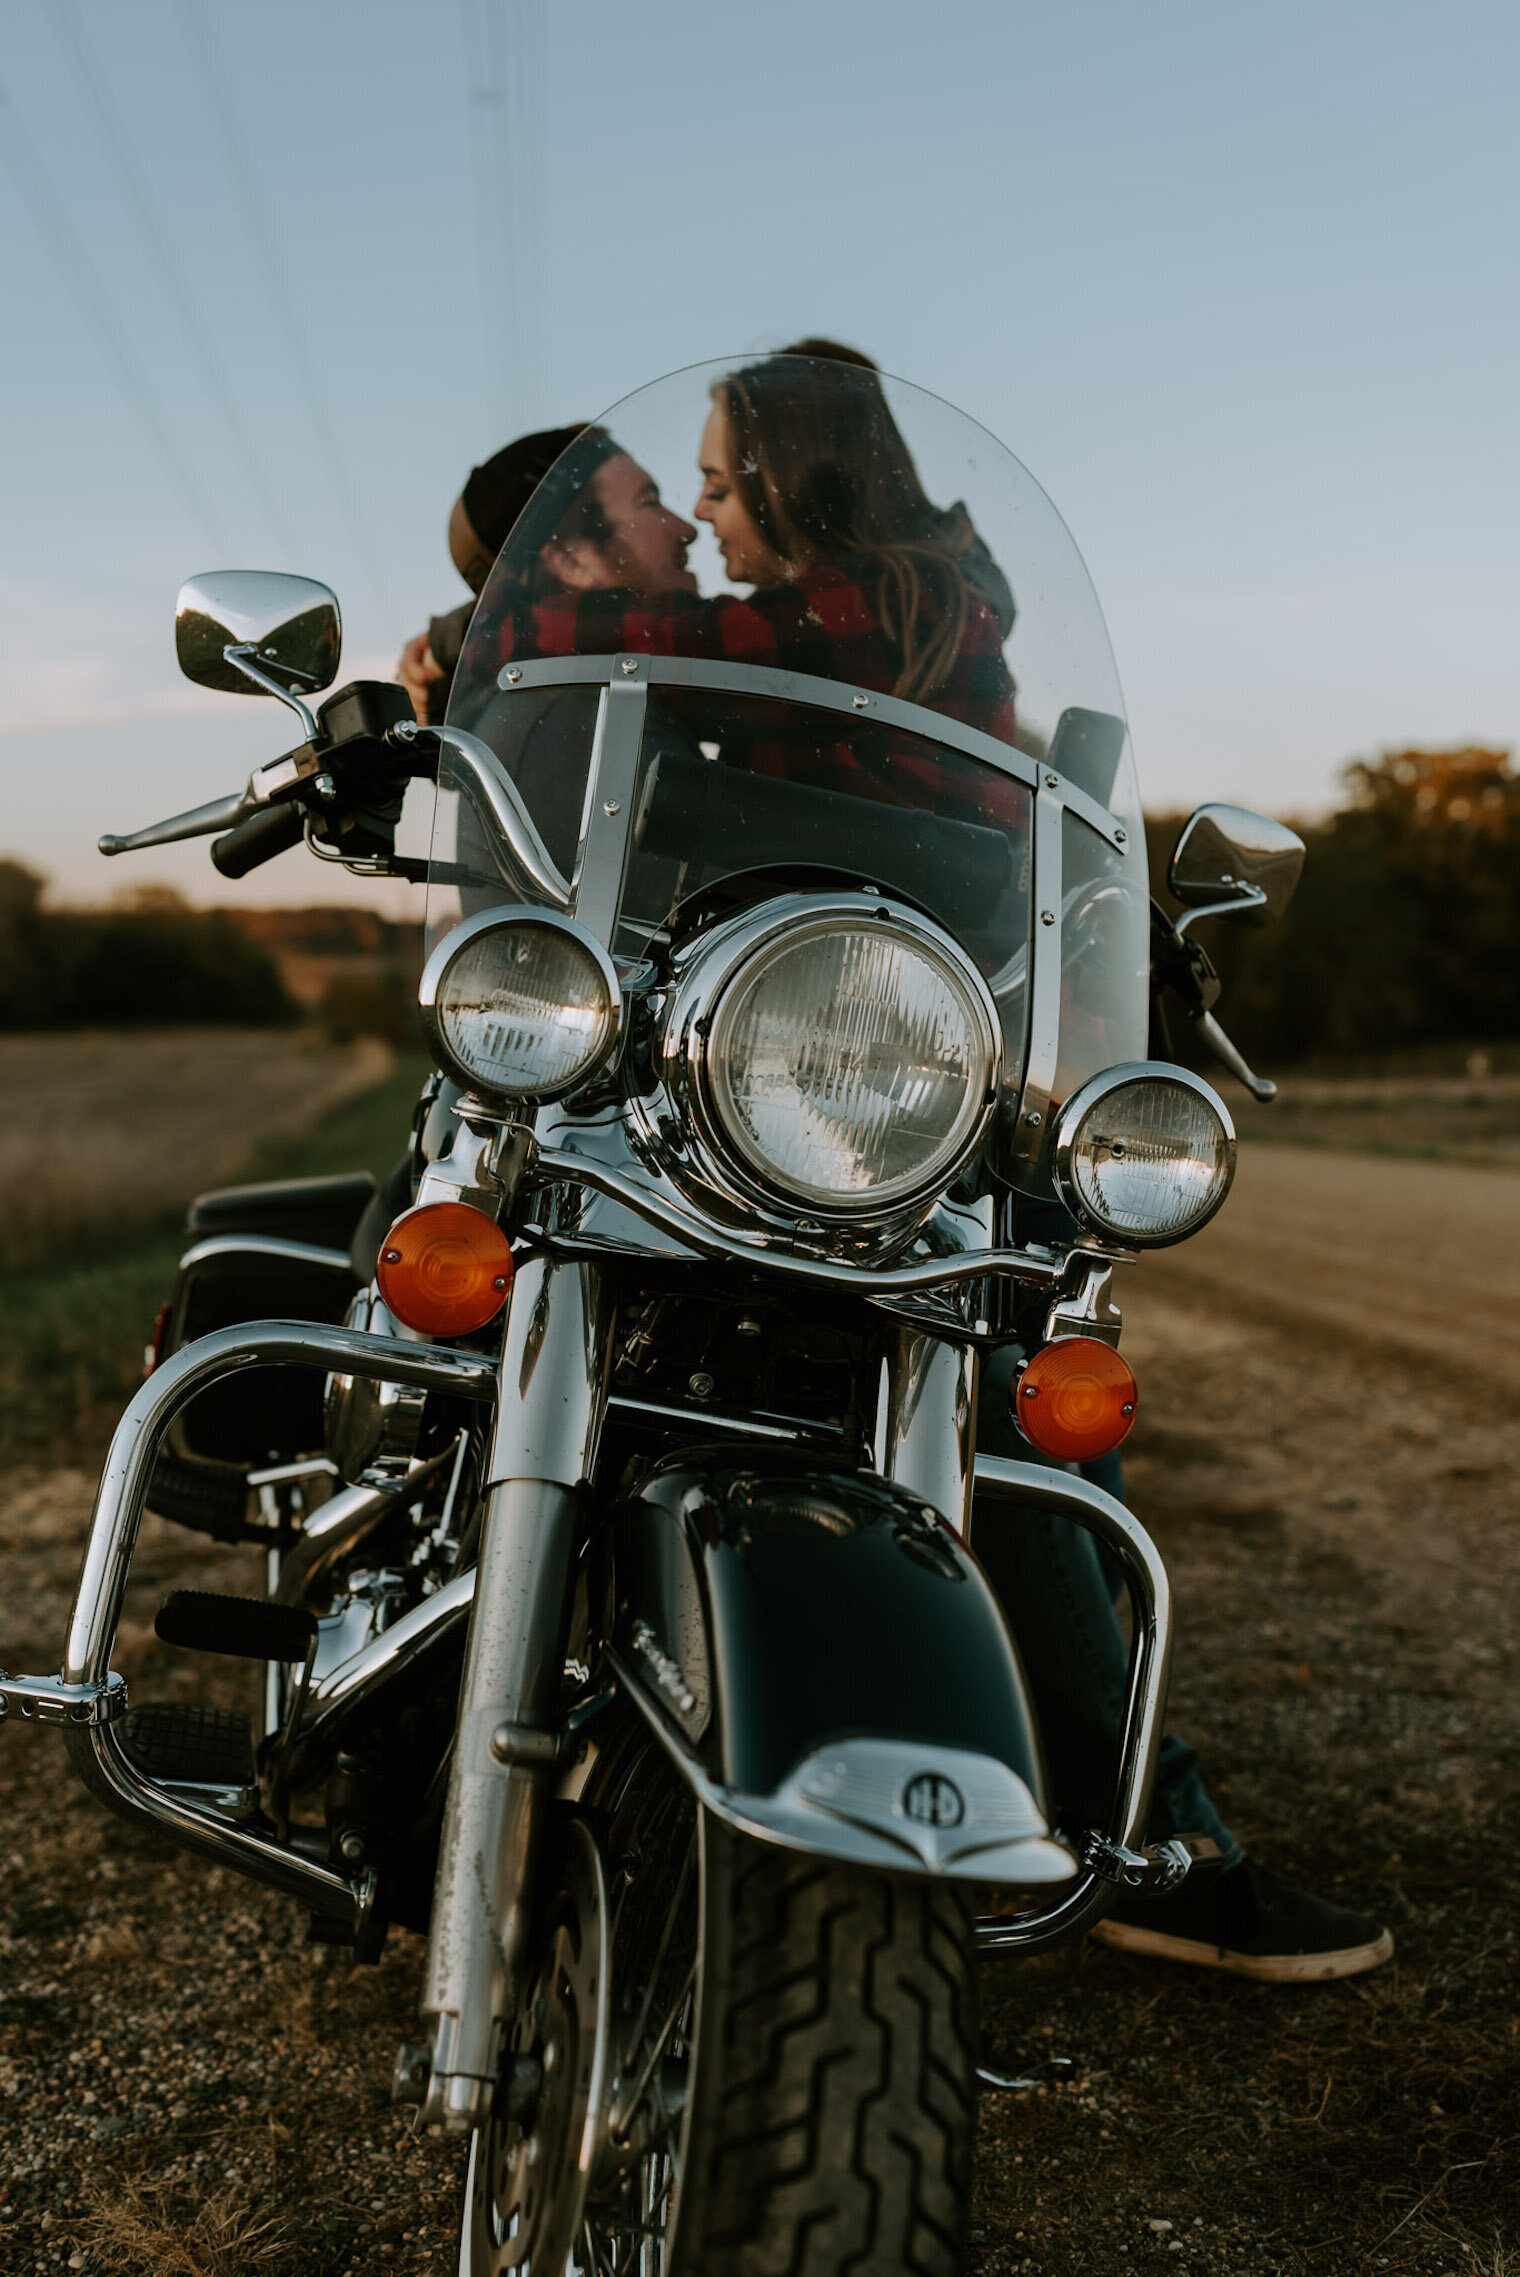 edgy-motorcycle-couples-engagement-session3